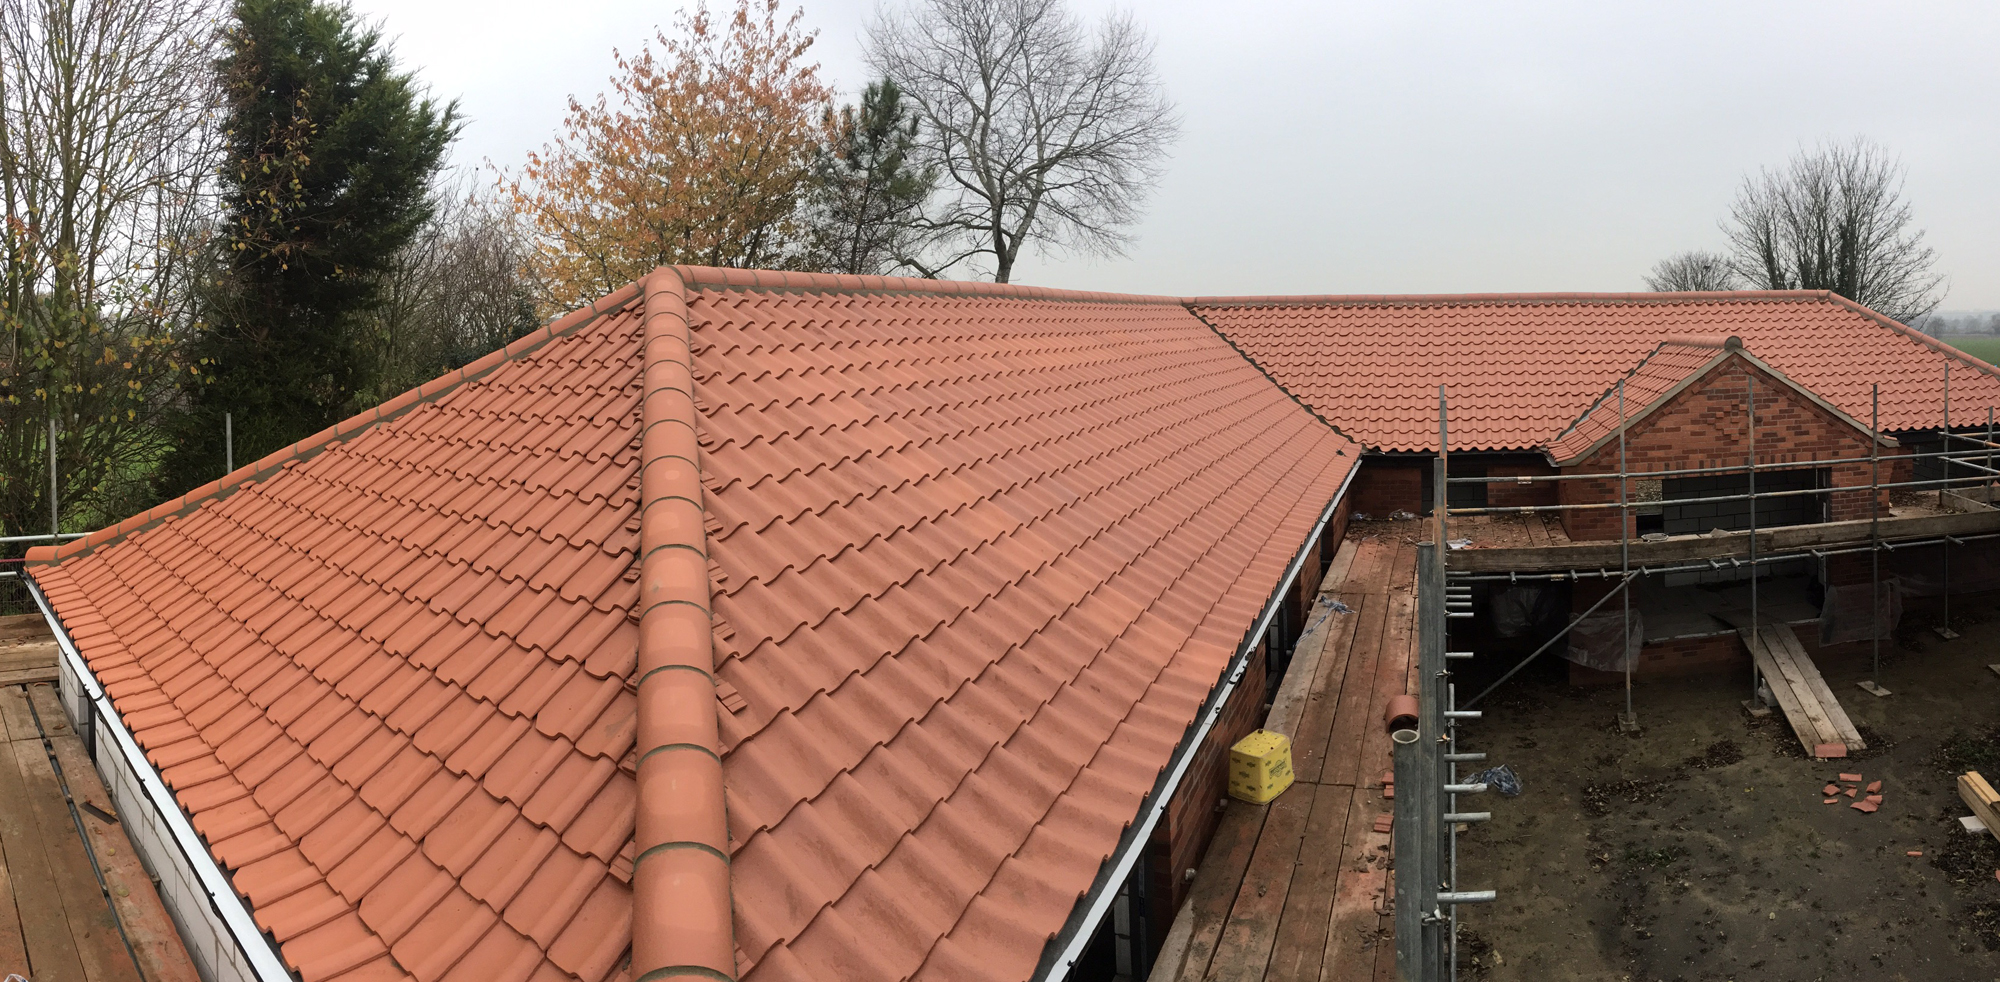 New tiled roof and ridge work